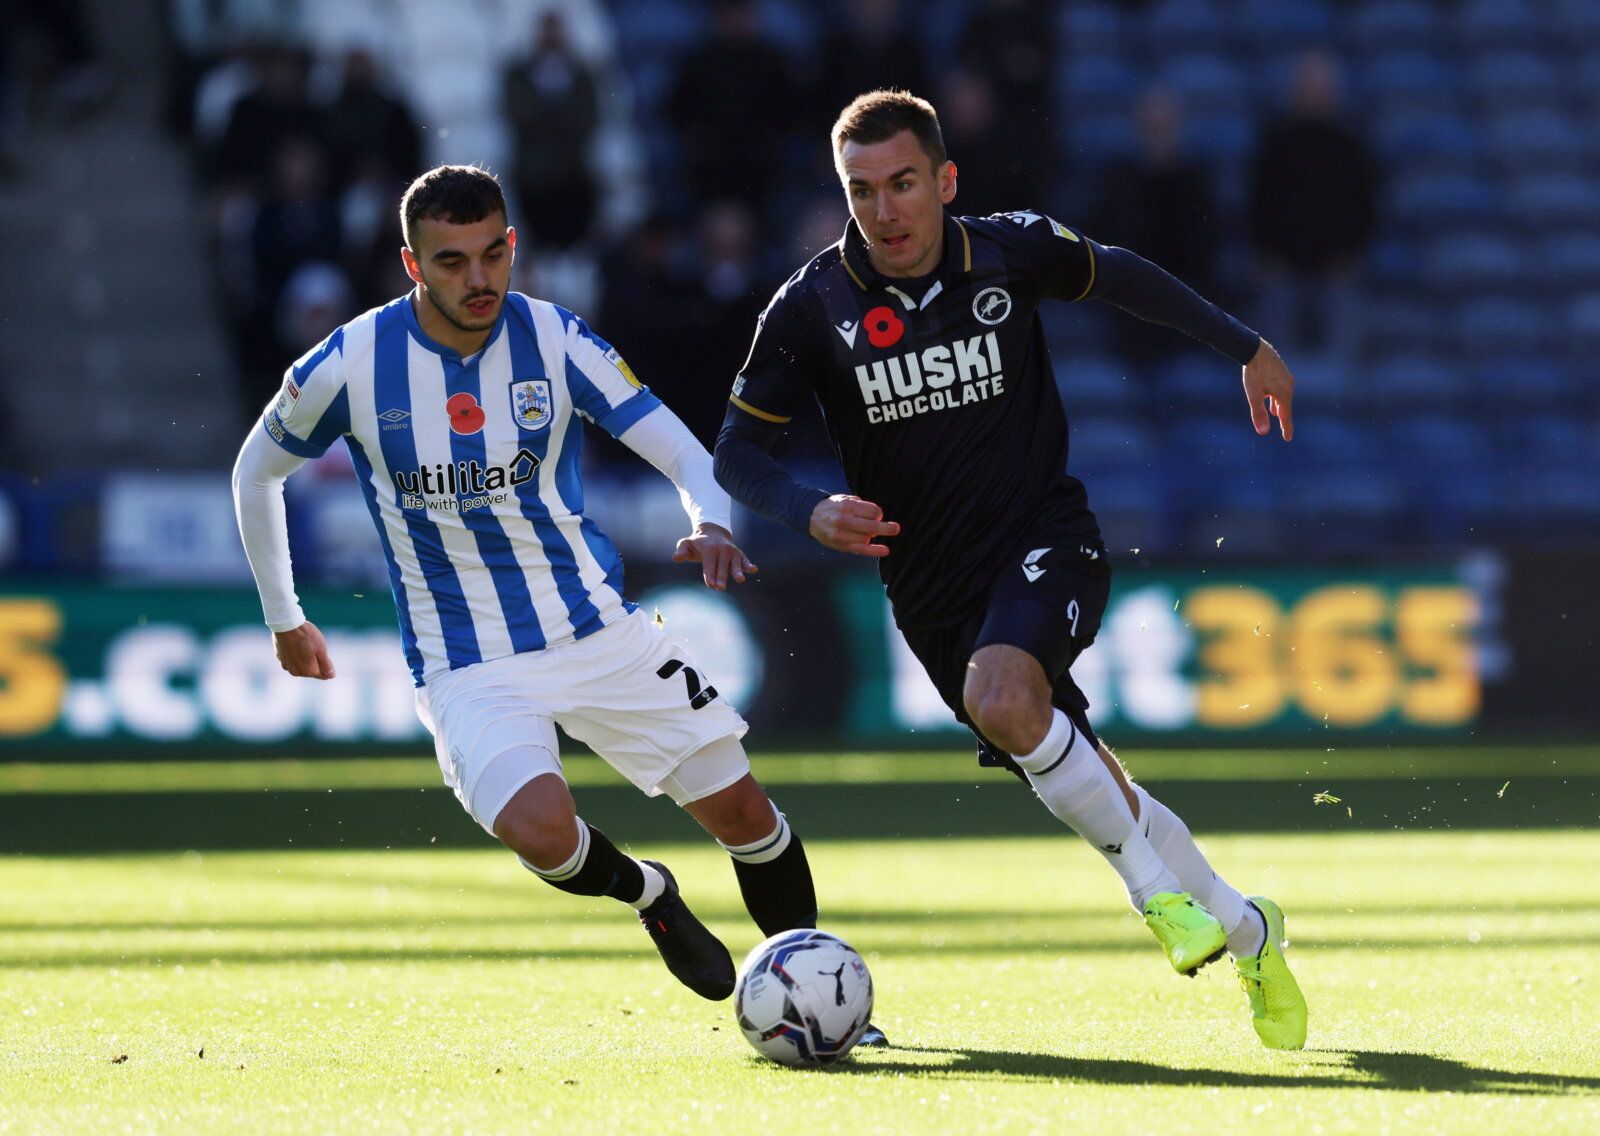 Soccer Football - Championship - Huddersfield Town v Millwall - John Smith's Stadium, Huddersfield, Britain - October 30, 2021 Millwall's Jed Wallace in action with Huddersfield Town's Danel Sinani   Action Images/John Clifton  EDITORIAL USE ONLY. No use with unauthorized audio, video, data, fixture lists, club/league logos or 